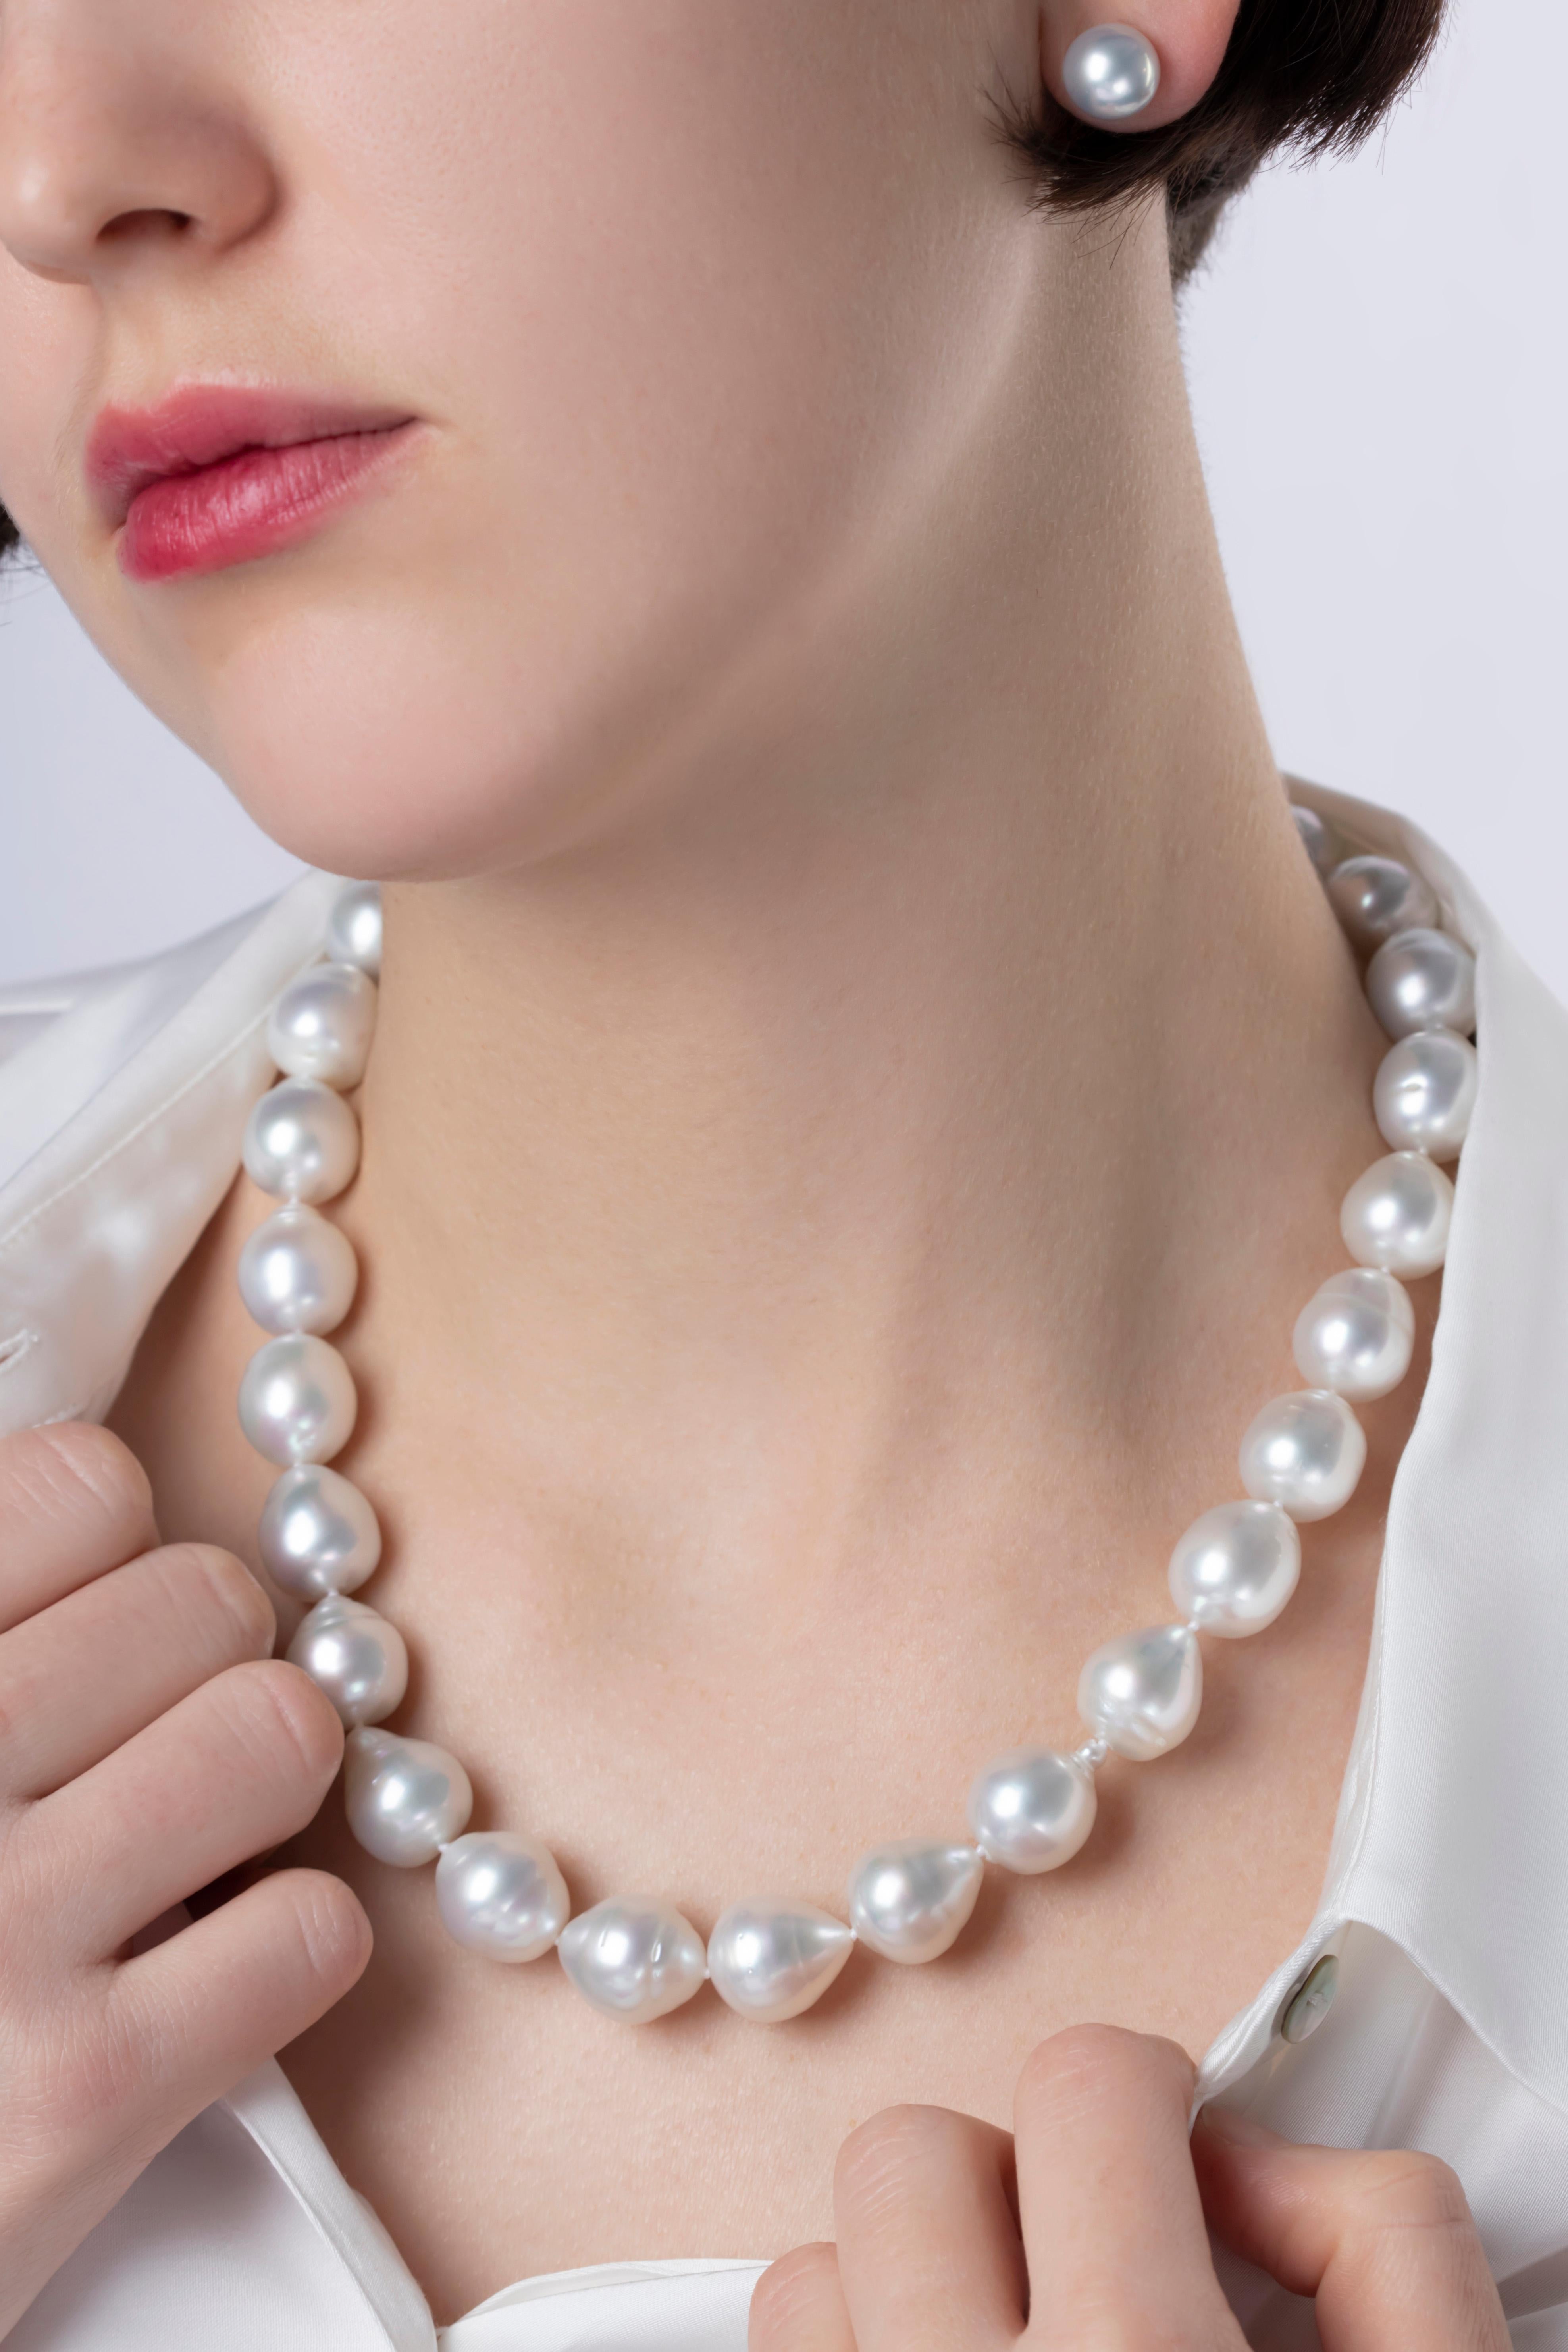 This unique necklace by Yoko London features a row of spectacular baroque South Sea pearls completed with an 18K white gold clasp. Each baroque pearl is completely one-of-a-kind and this necklace has been designed to showcase each pearl’s alluring